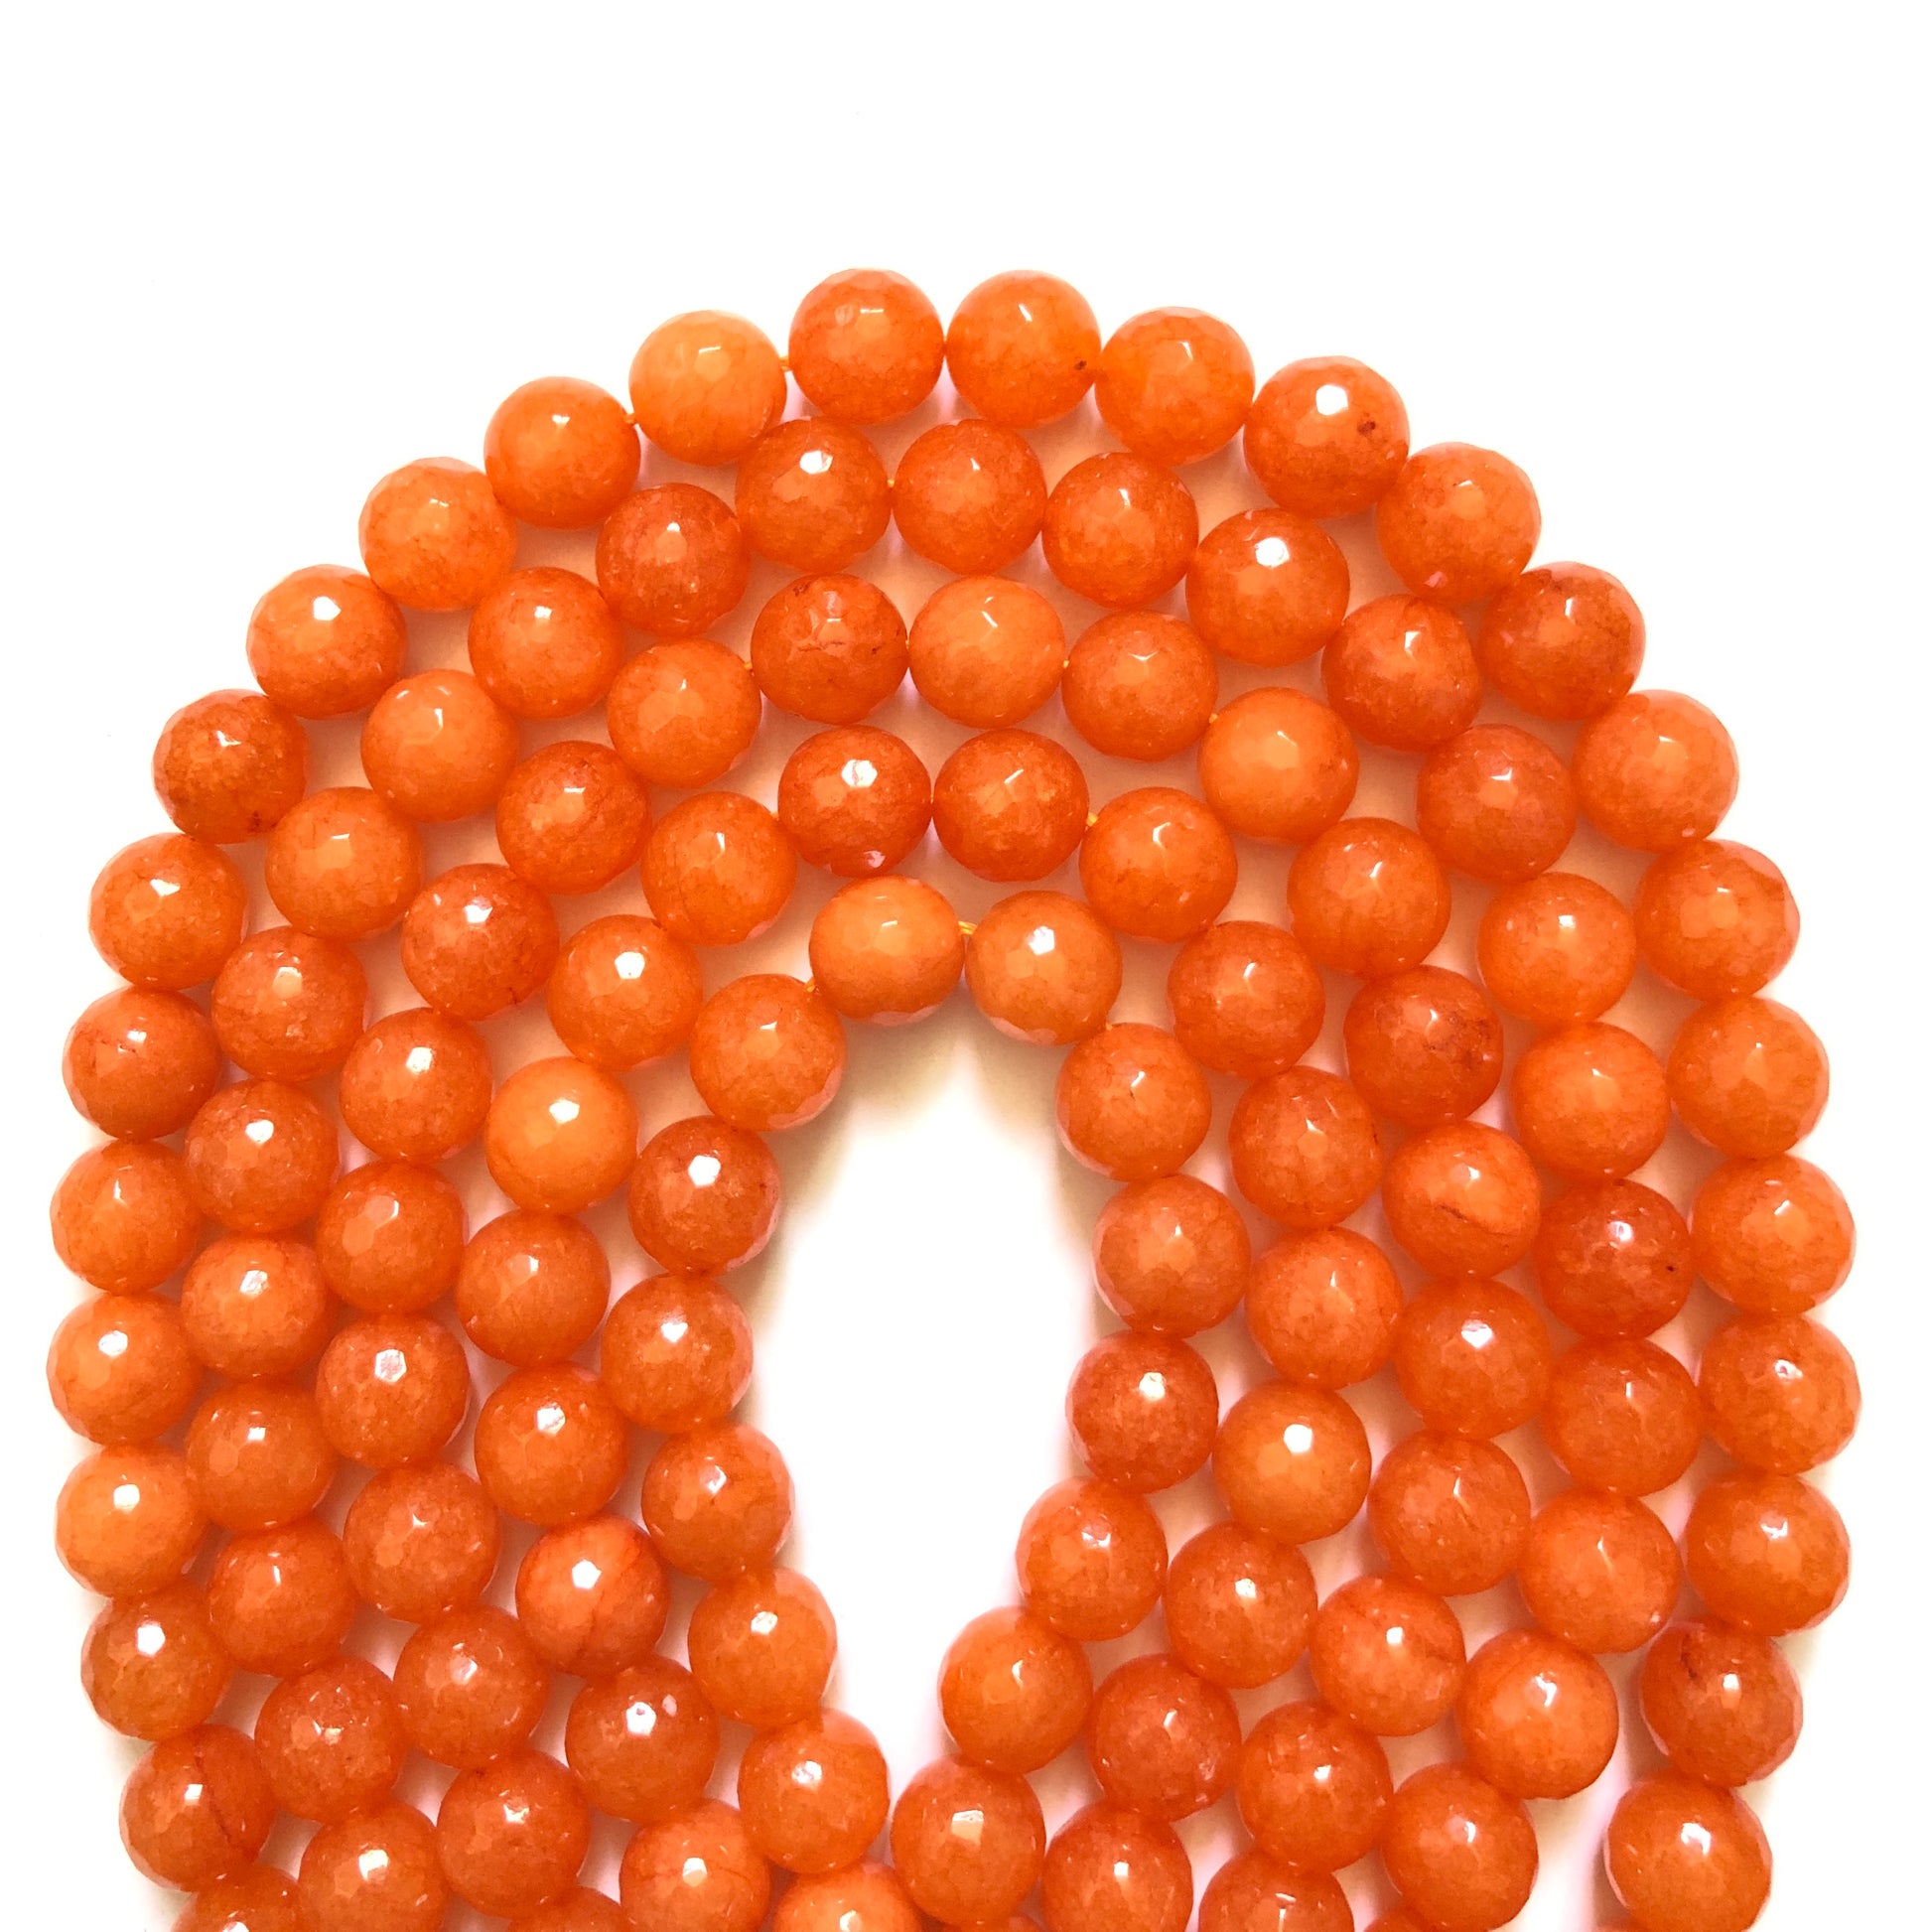 2 Strands/lot 10mm Orange Faceted Jade Stone Beads Stone Beads Faceted Jade Beads New Beads Arrivals Charms Beads Beyond